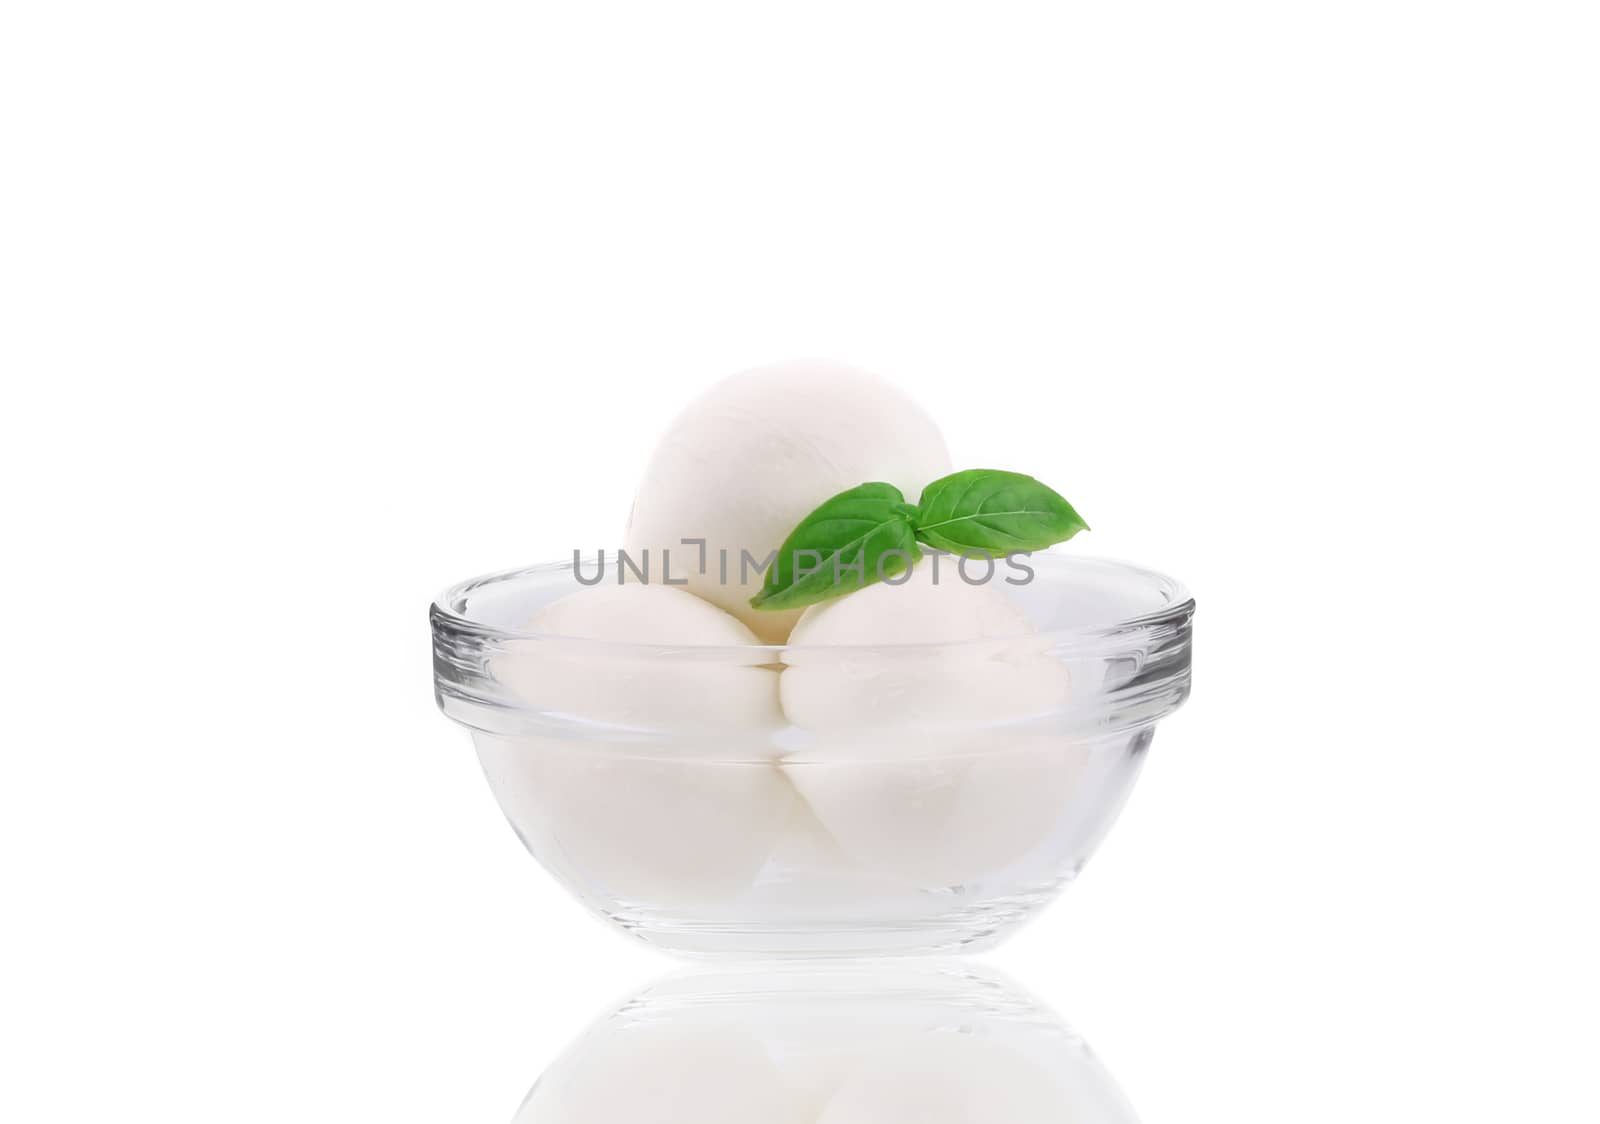 Mozzarella balls in glass bowl. Isolated on a white background.